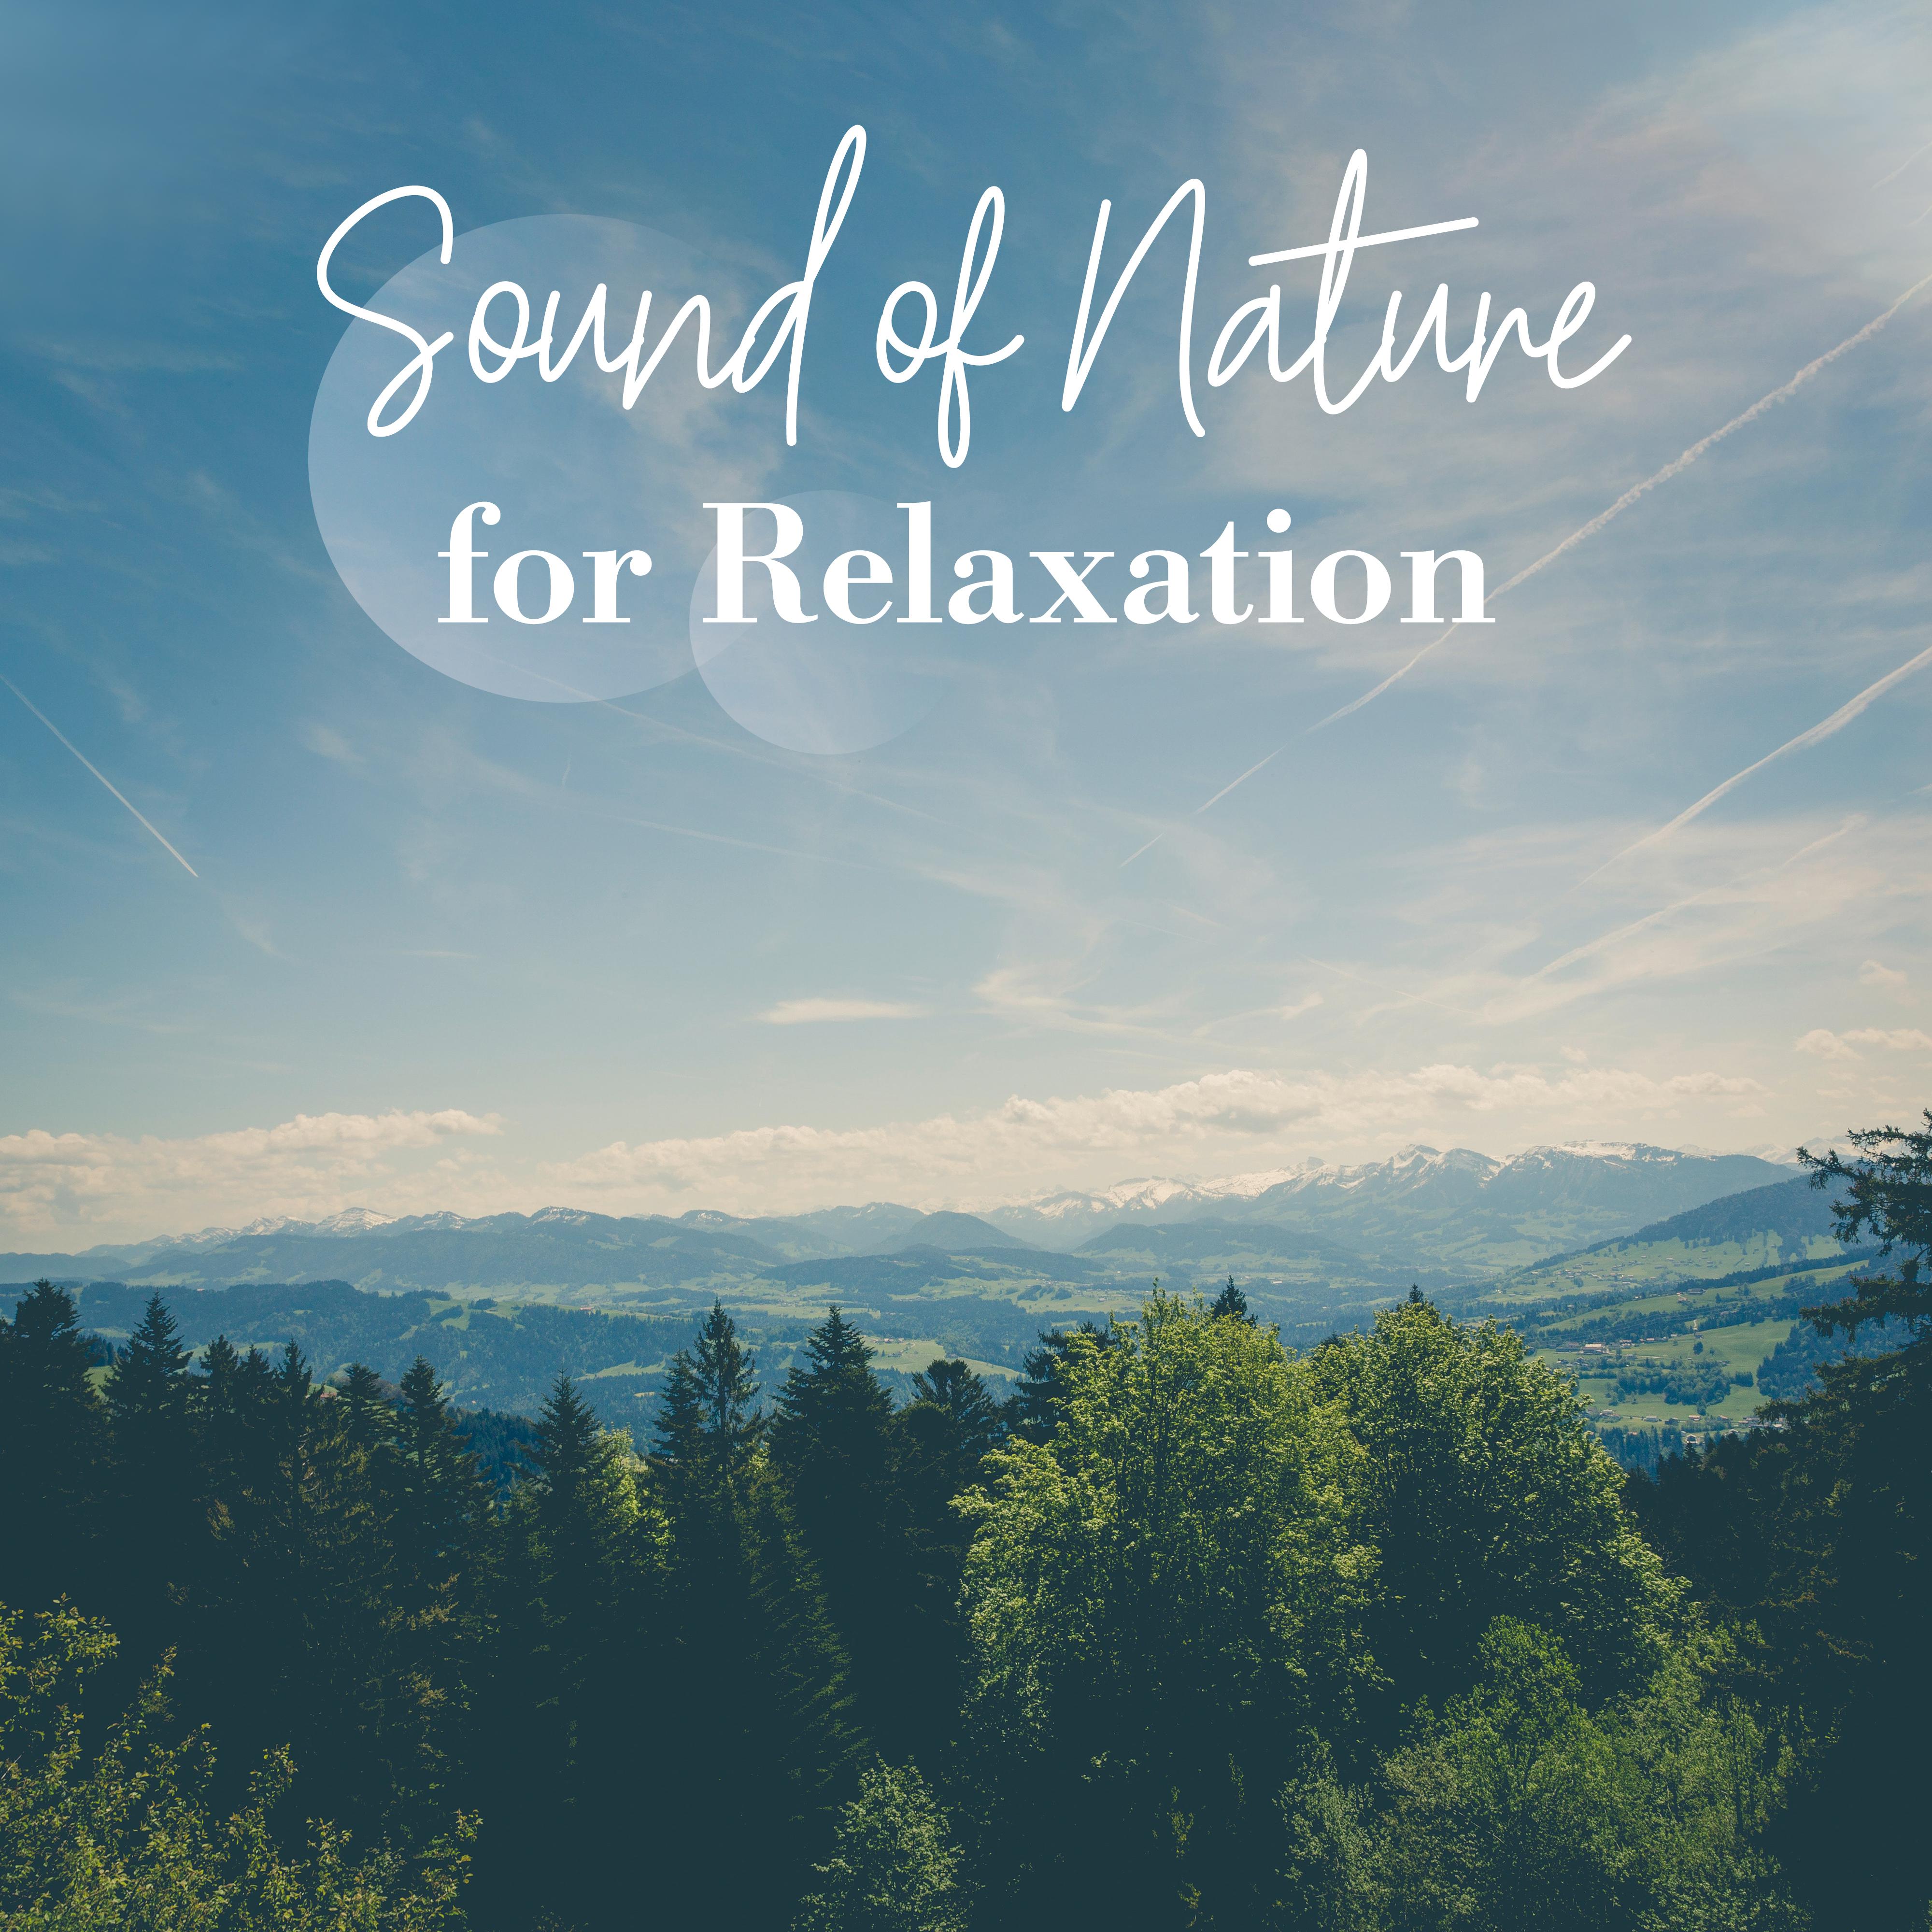 Sounds of Nature for Relaxation: Relief Music, Relaxing Vibes, New Age Music to Calm Down, Zen, Lounge